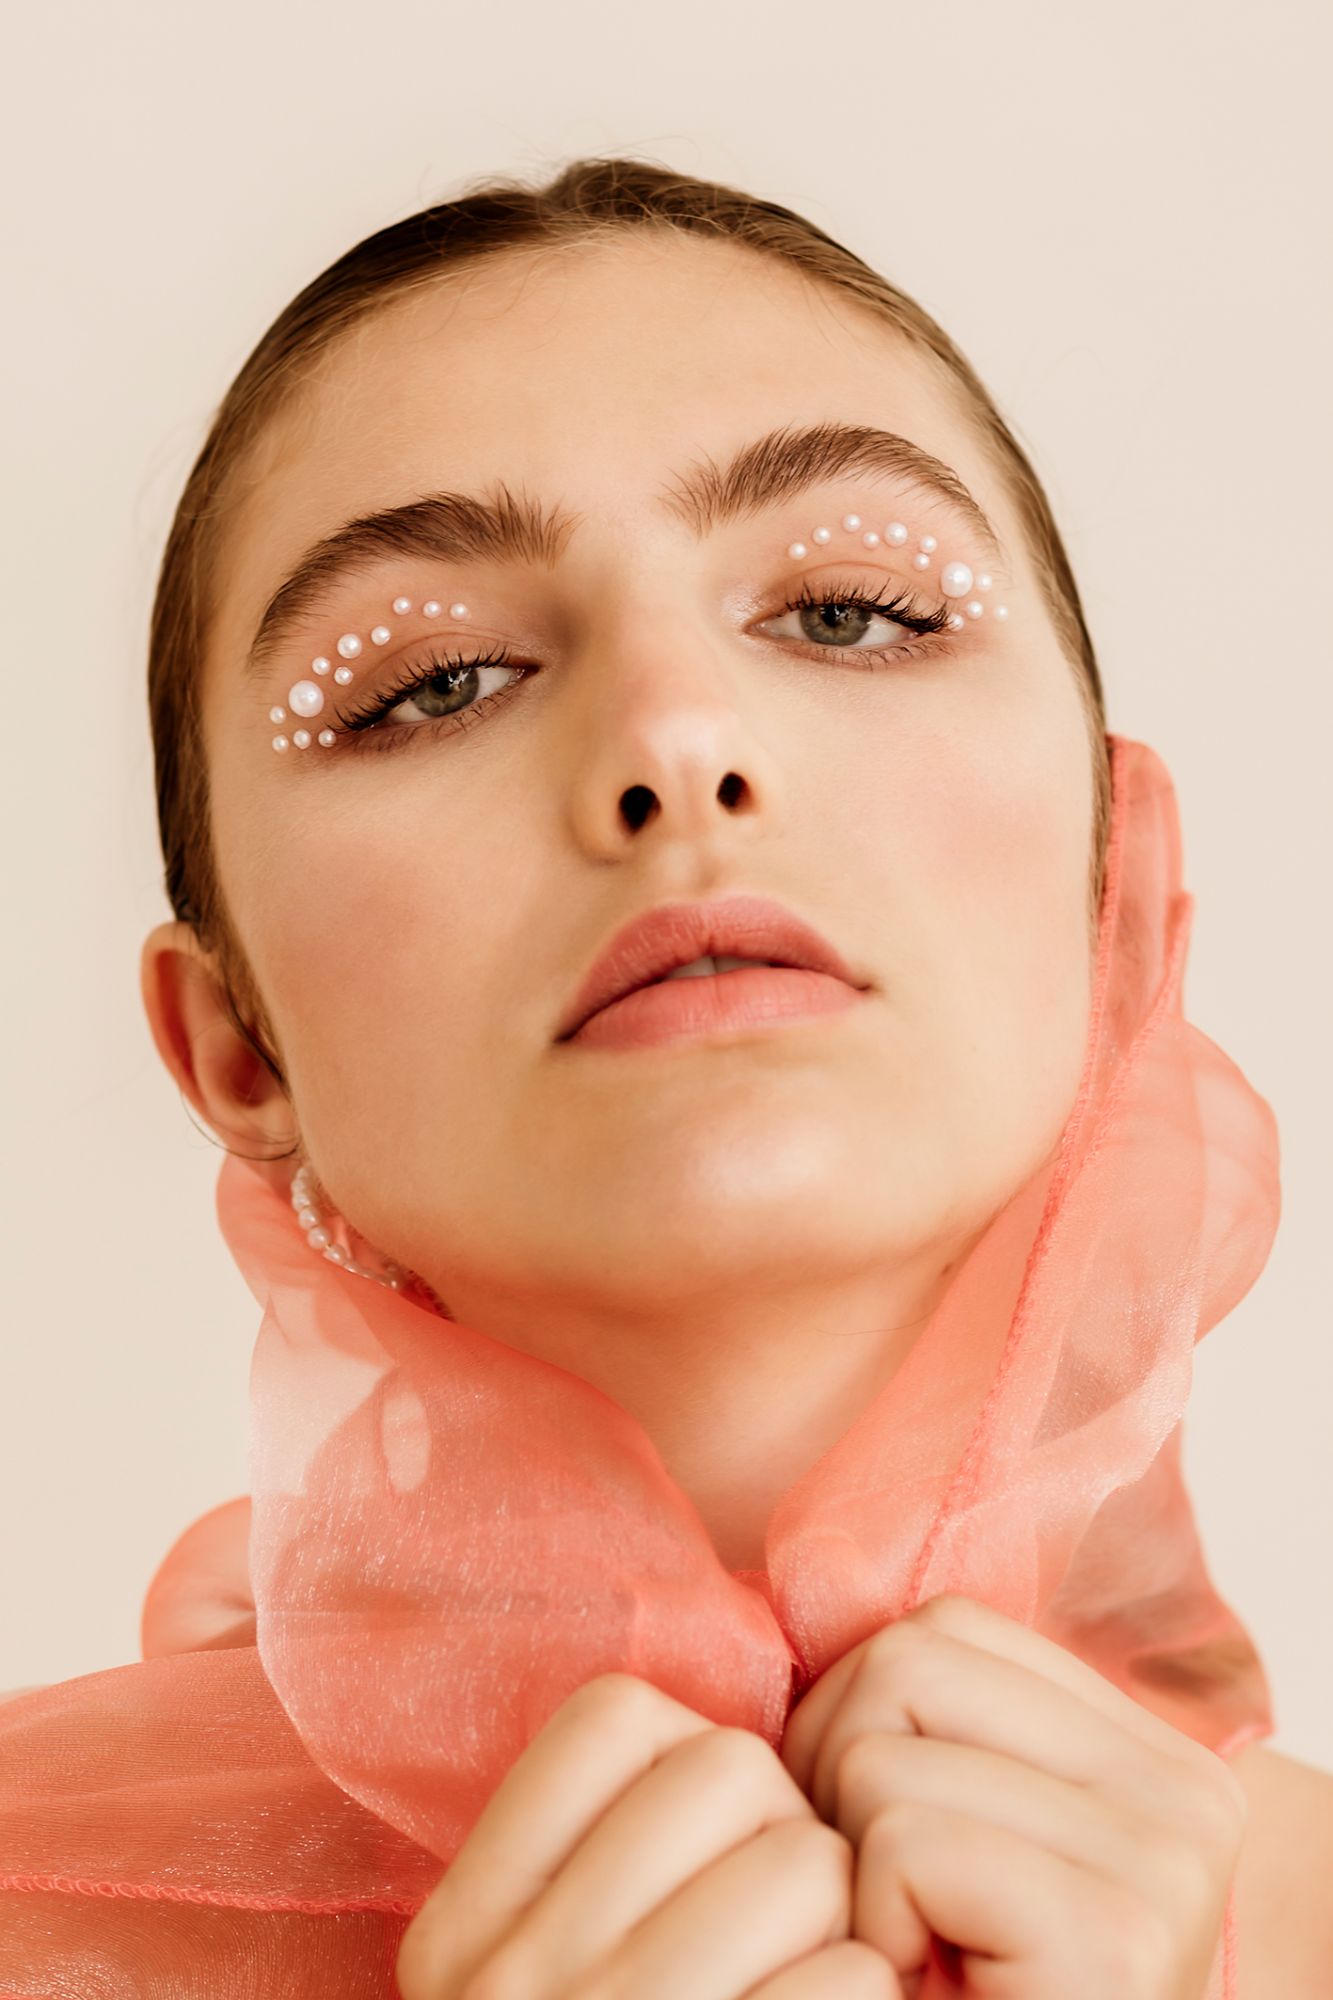 Model portrait; girl holding a tulle fabric over her head and has pearls around her eyes